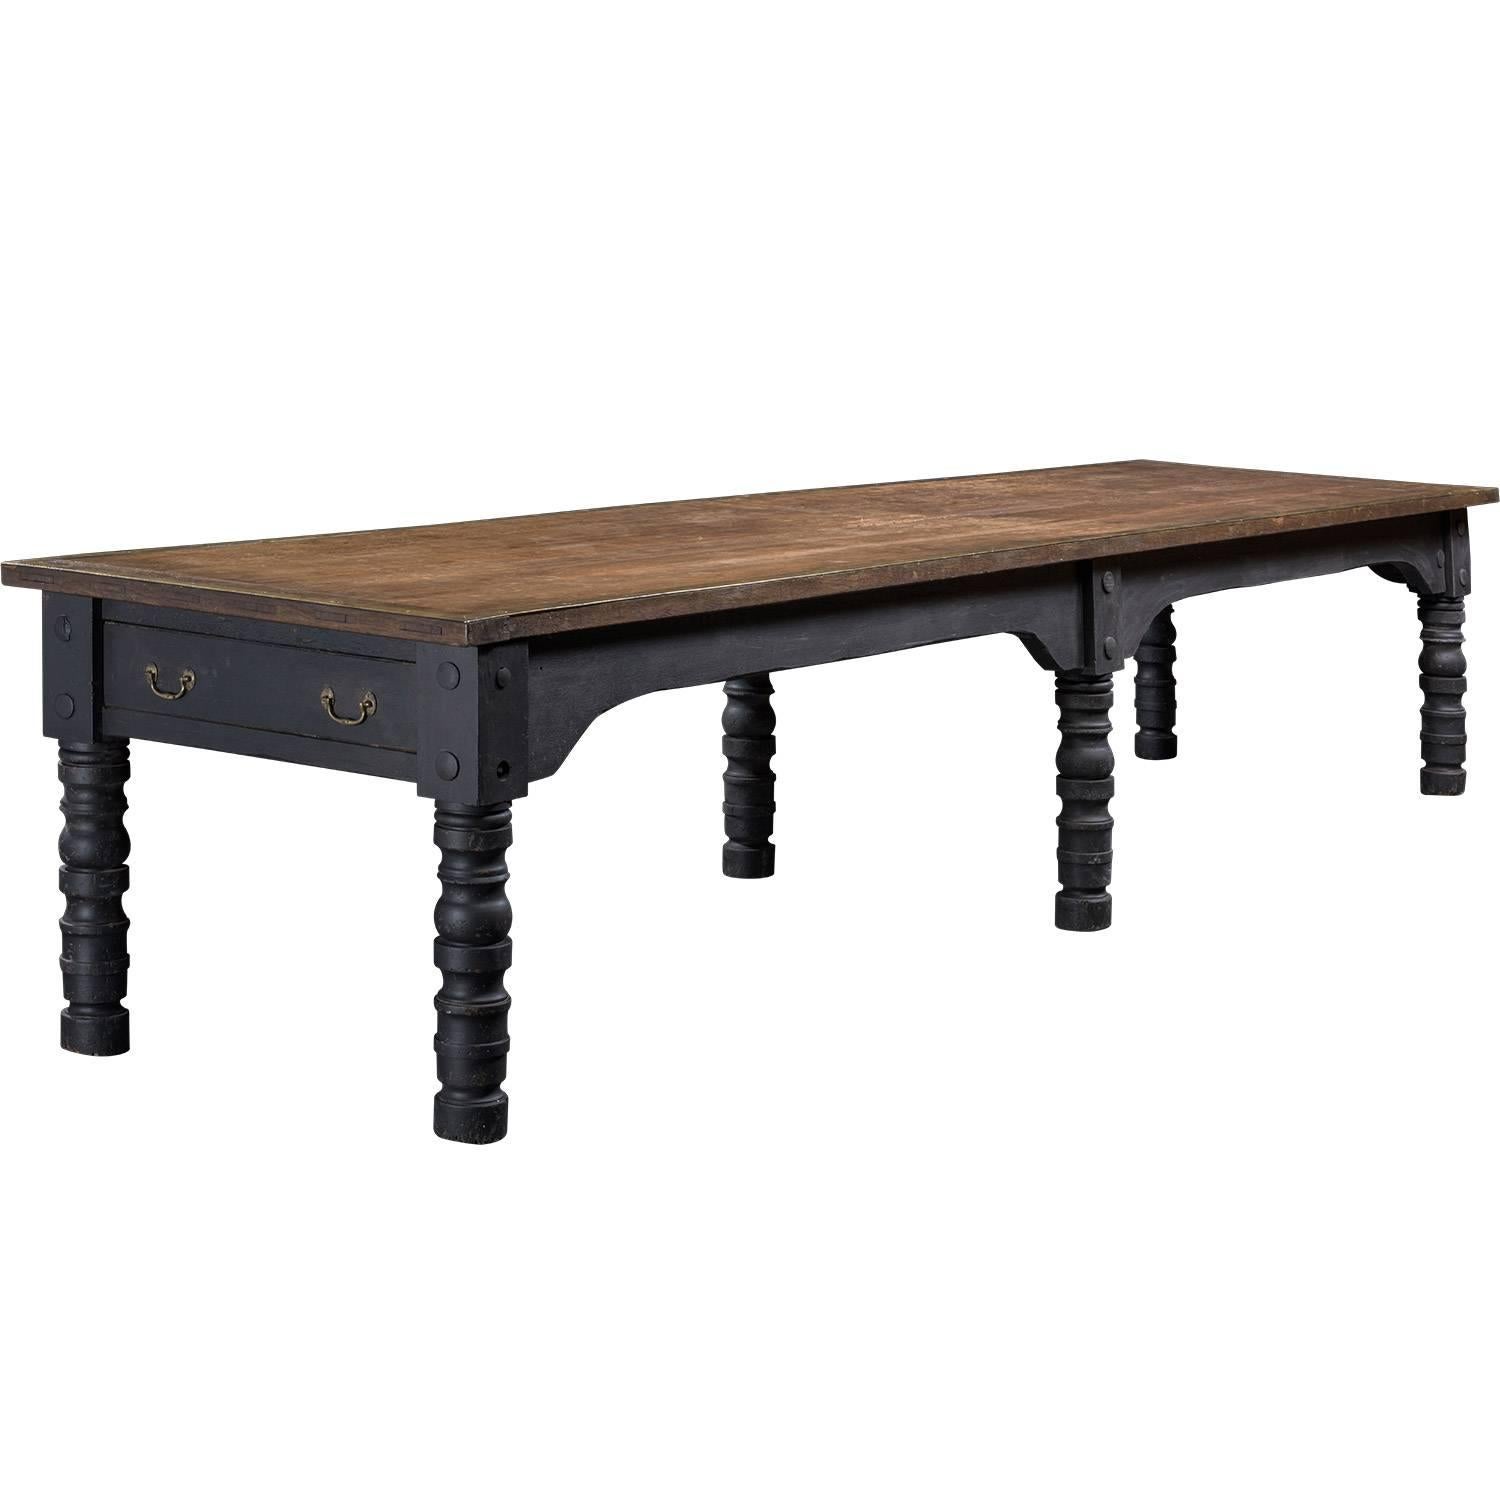 Oak and Turned Leg Dining Table, circa 1870